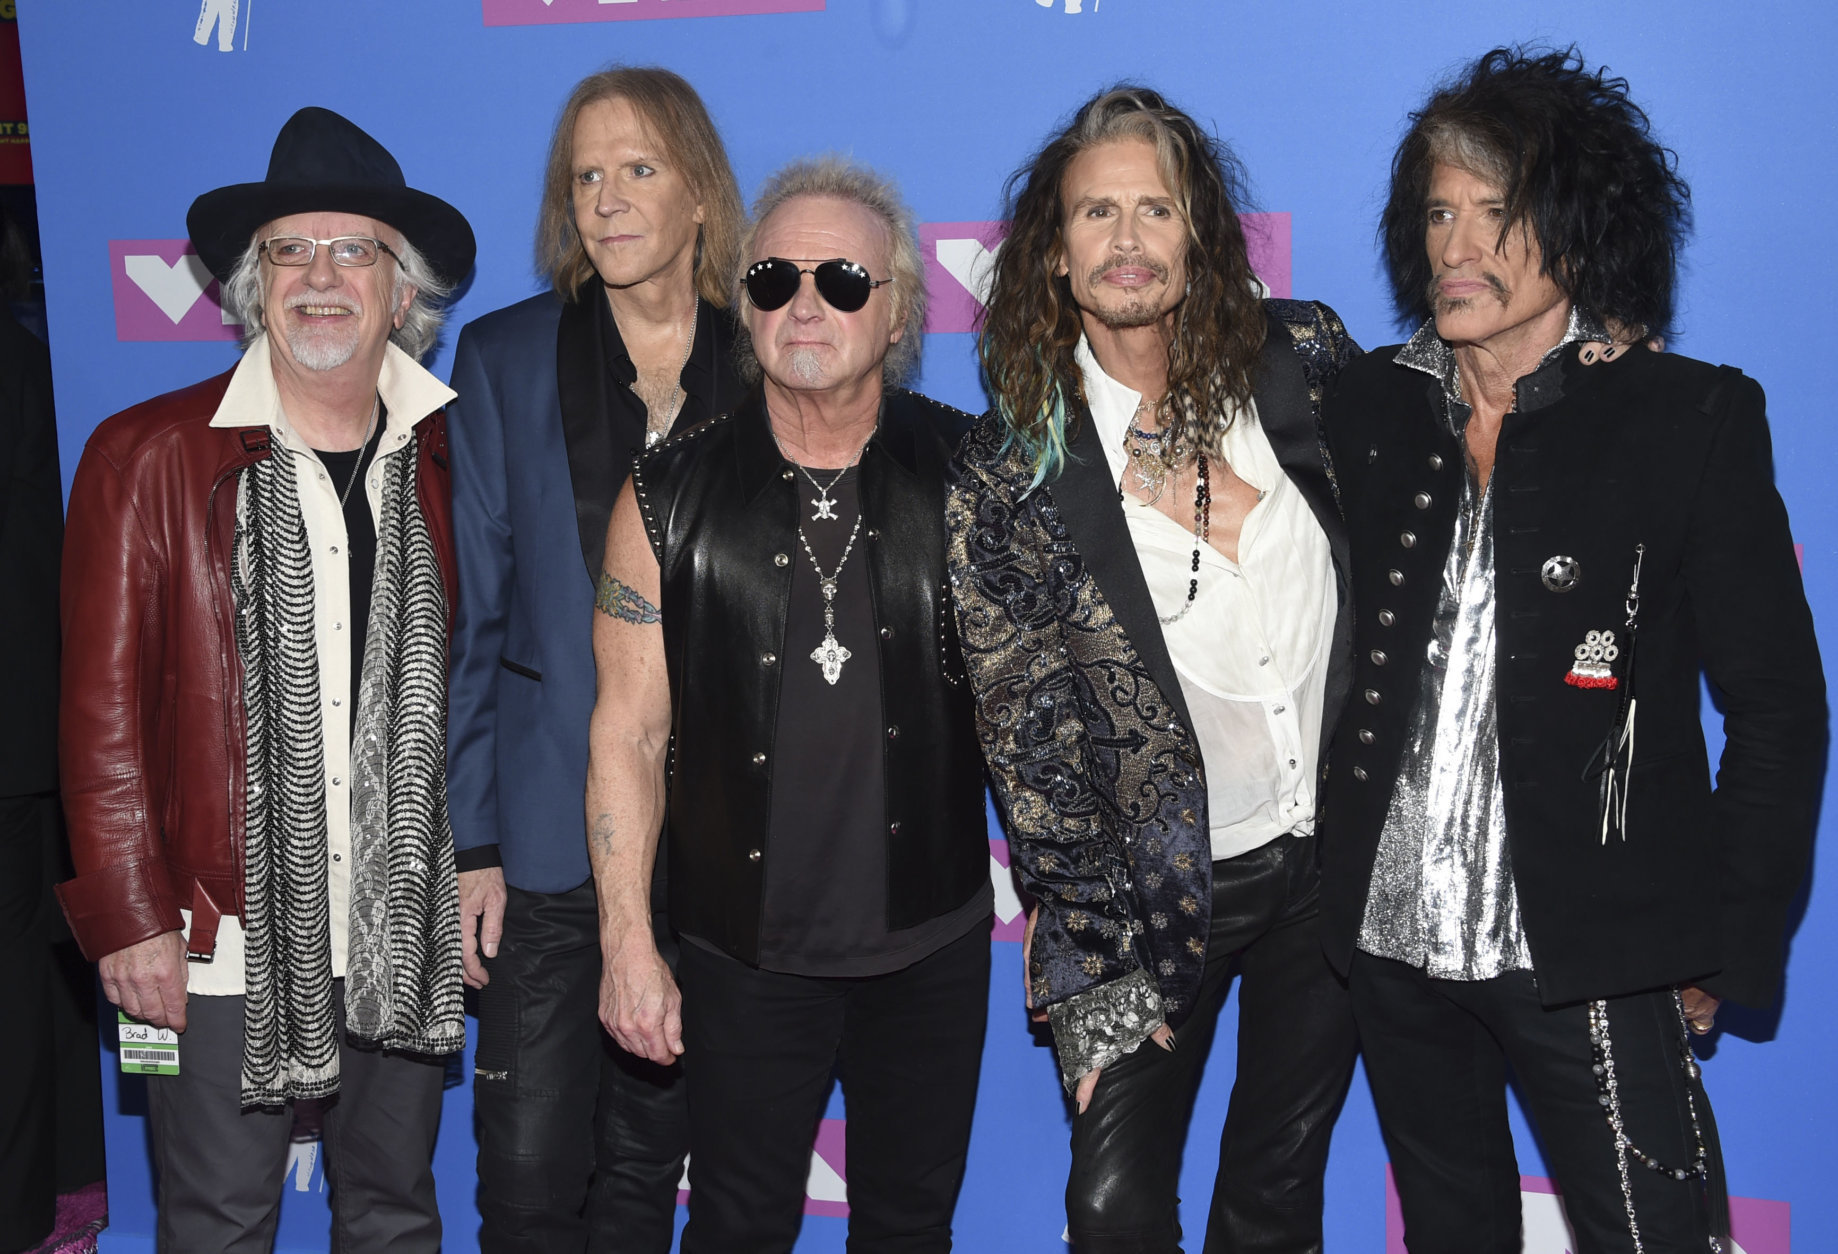 Brad Whitford, from left, Tom Hamilton, Joey Kramer, Steven Tyler and Joe Perry of Aerosmith arrive at the MTV Video Music Awards at Radio City Music Hall on Monday, Aug. 20, 2018, in New York. (Photo by Evan Agostini/Invision/AP)